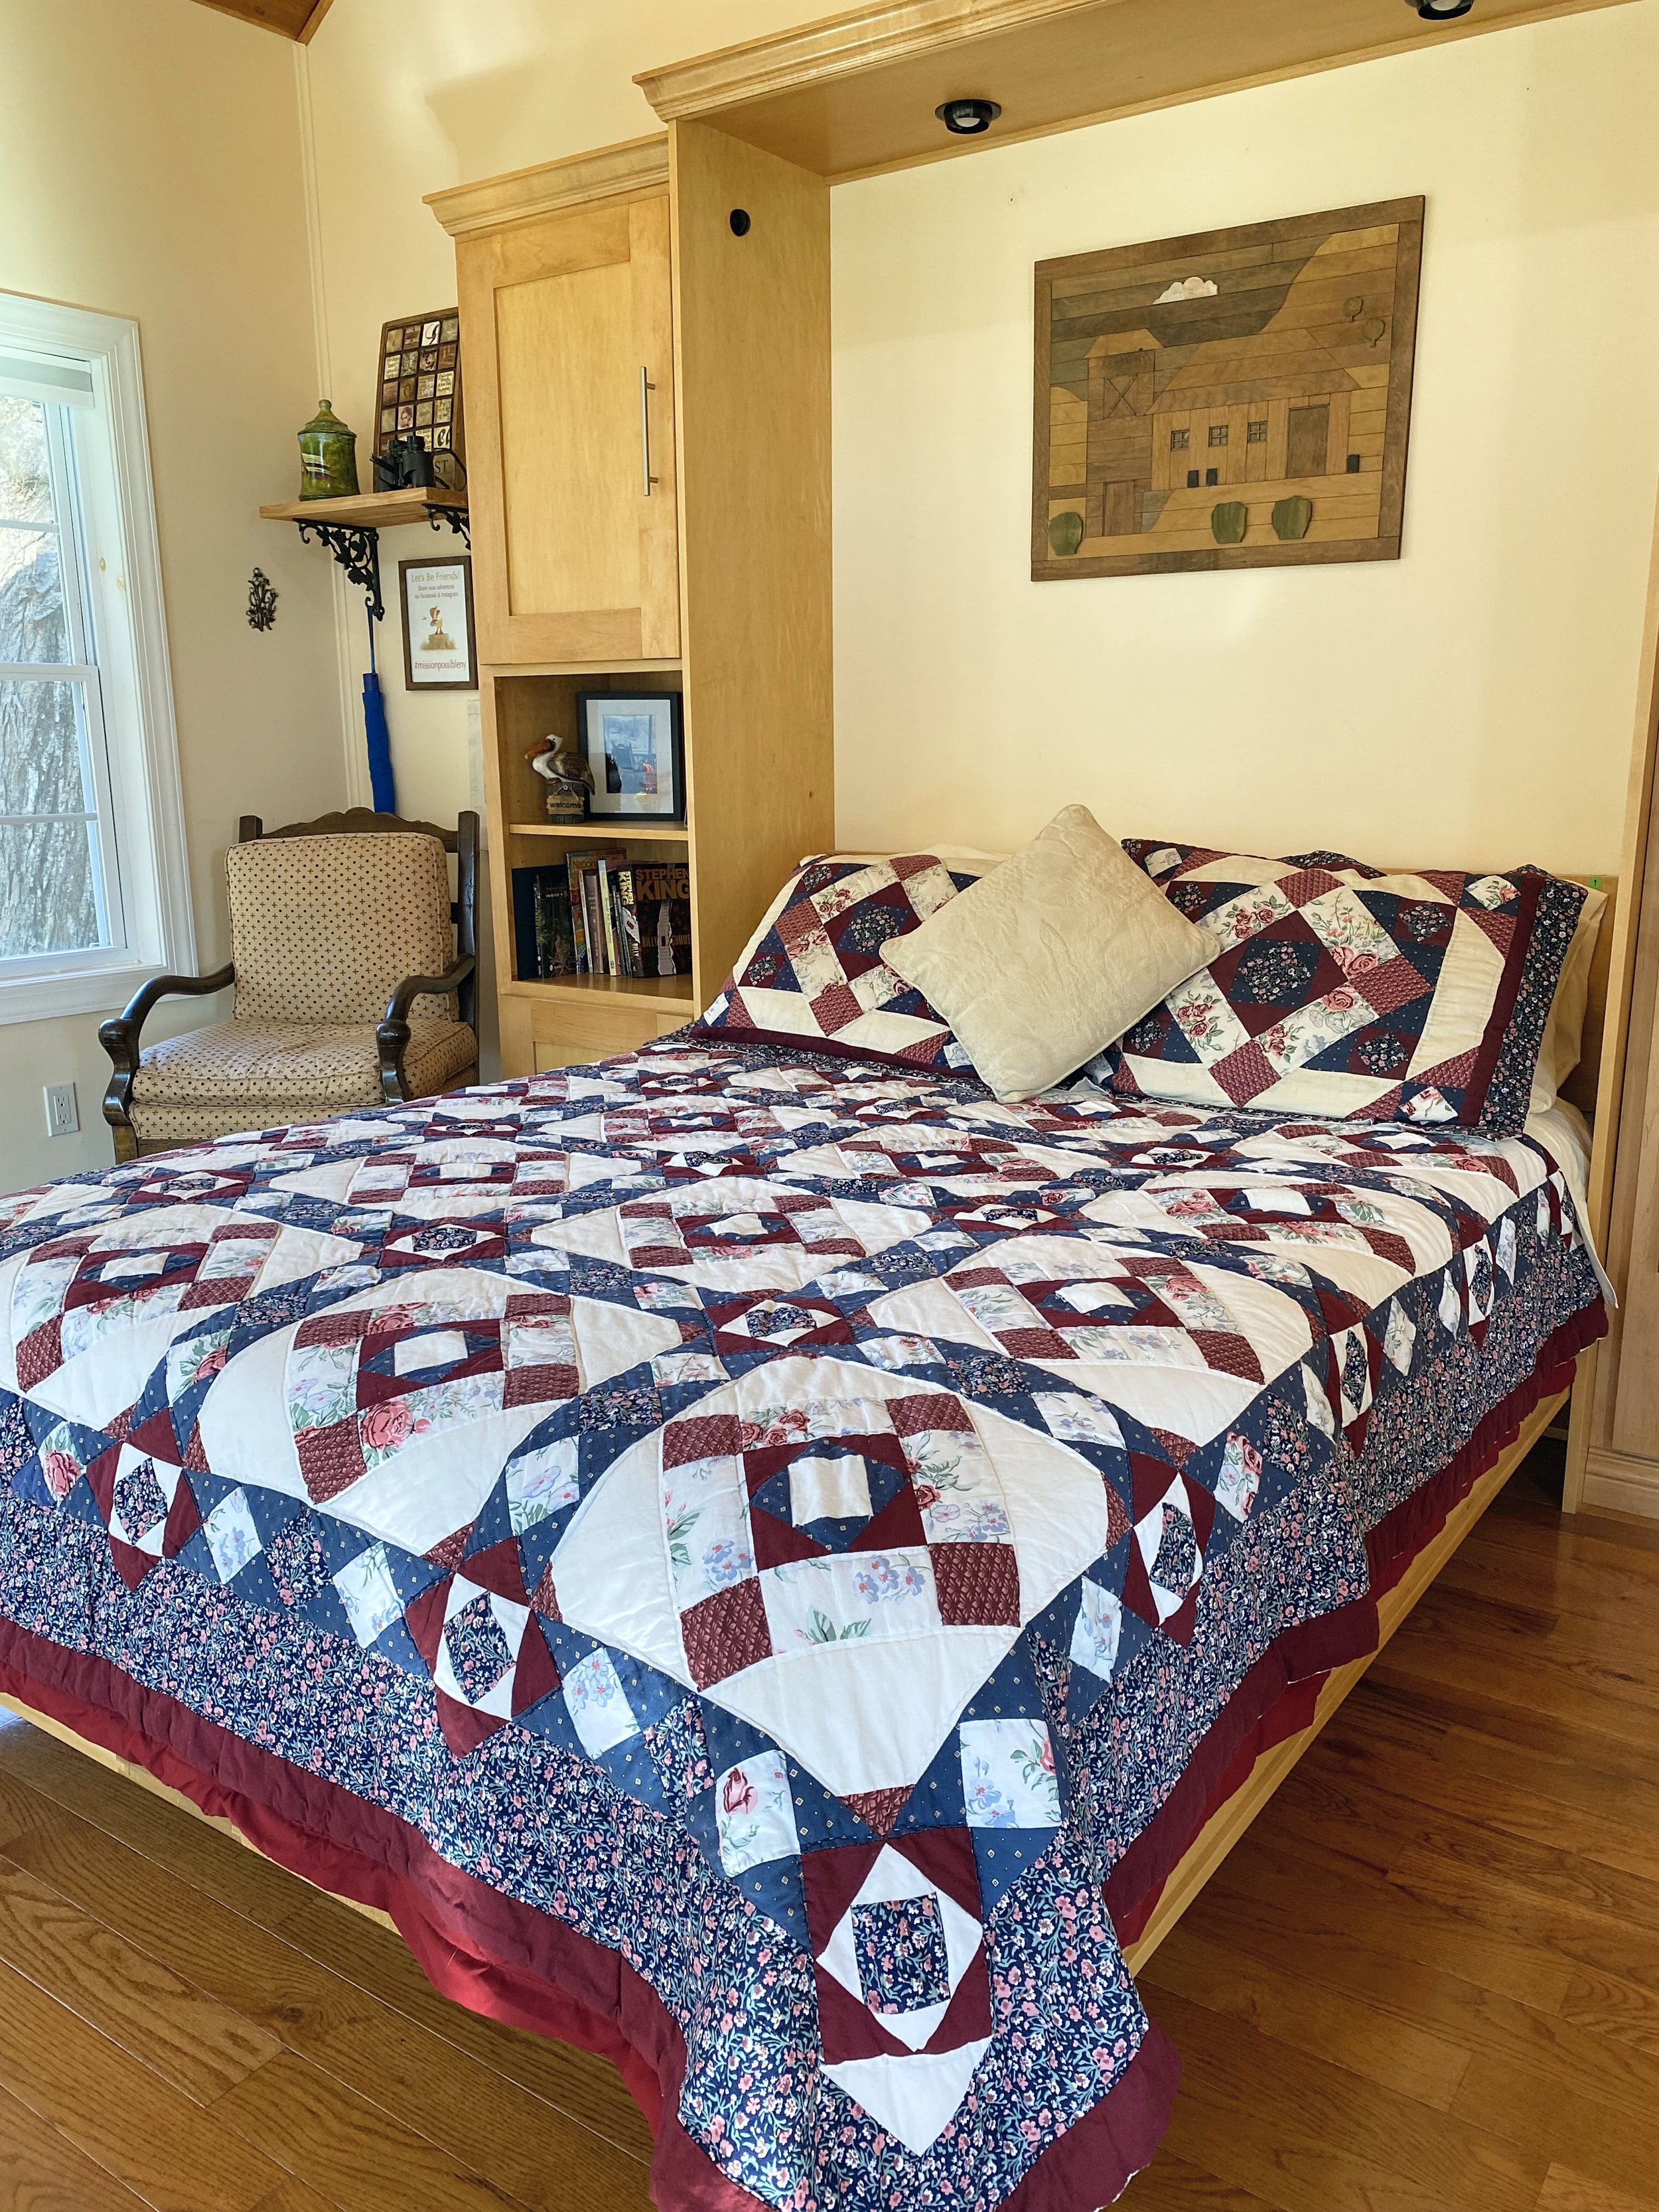 Queen Bed_Mission Possible Airbnb_NarrowsburgNY.JPG